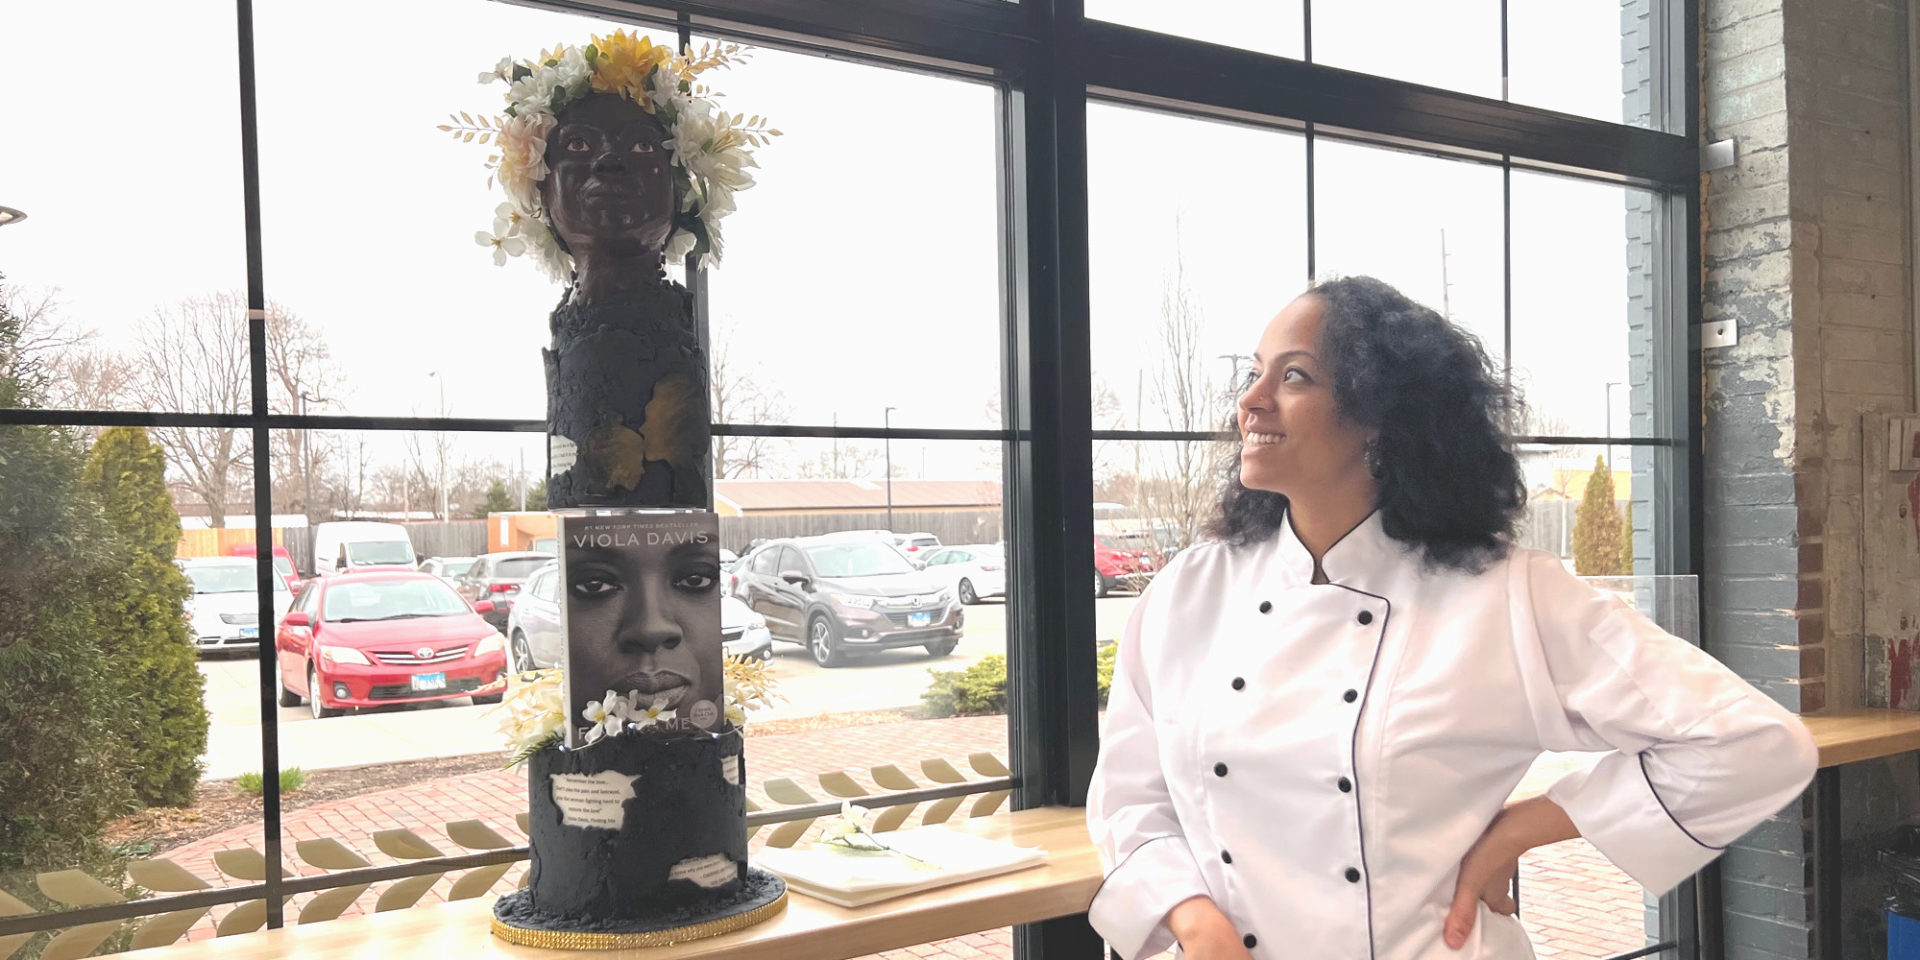 Cake Artist Tiara Winfield looks at her cake for the Edible Book Festival which she made in the likeness of Viola Davis to scale with a two tiered cake and edible book. Photo by Alyssa Buckley.